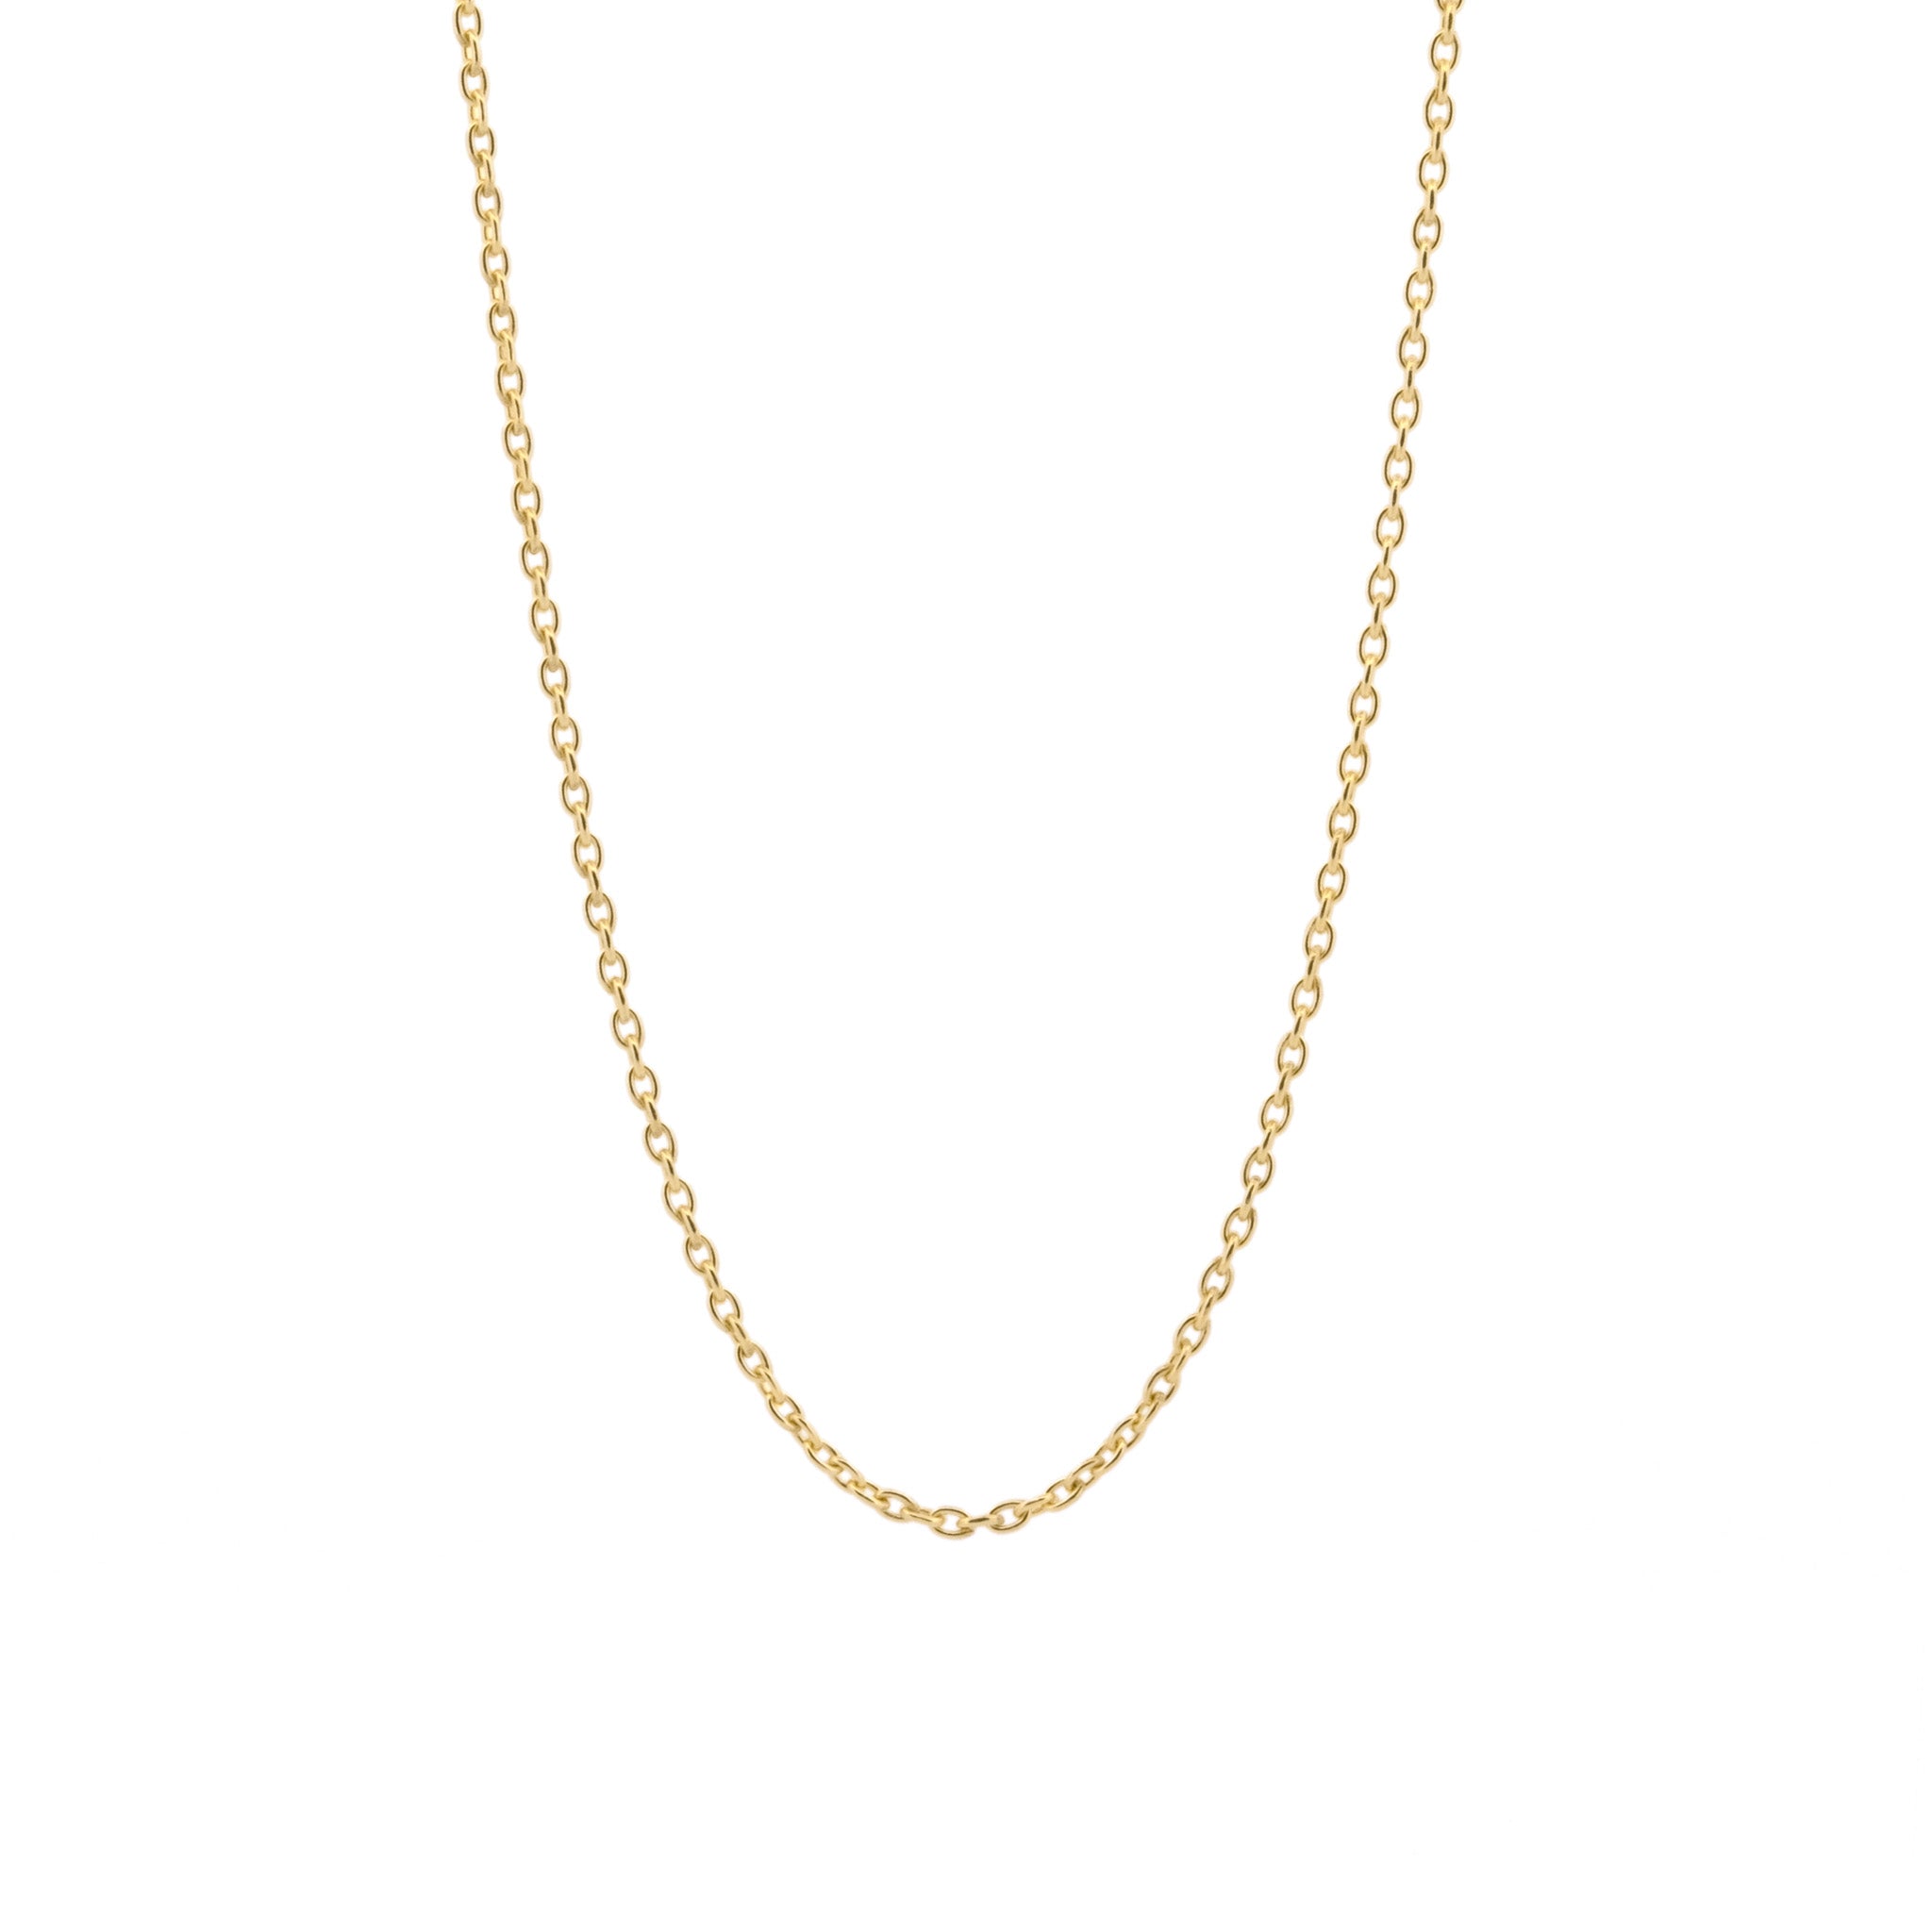 An Aiden Jae Daylight Chain Necklace on a white background.